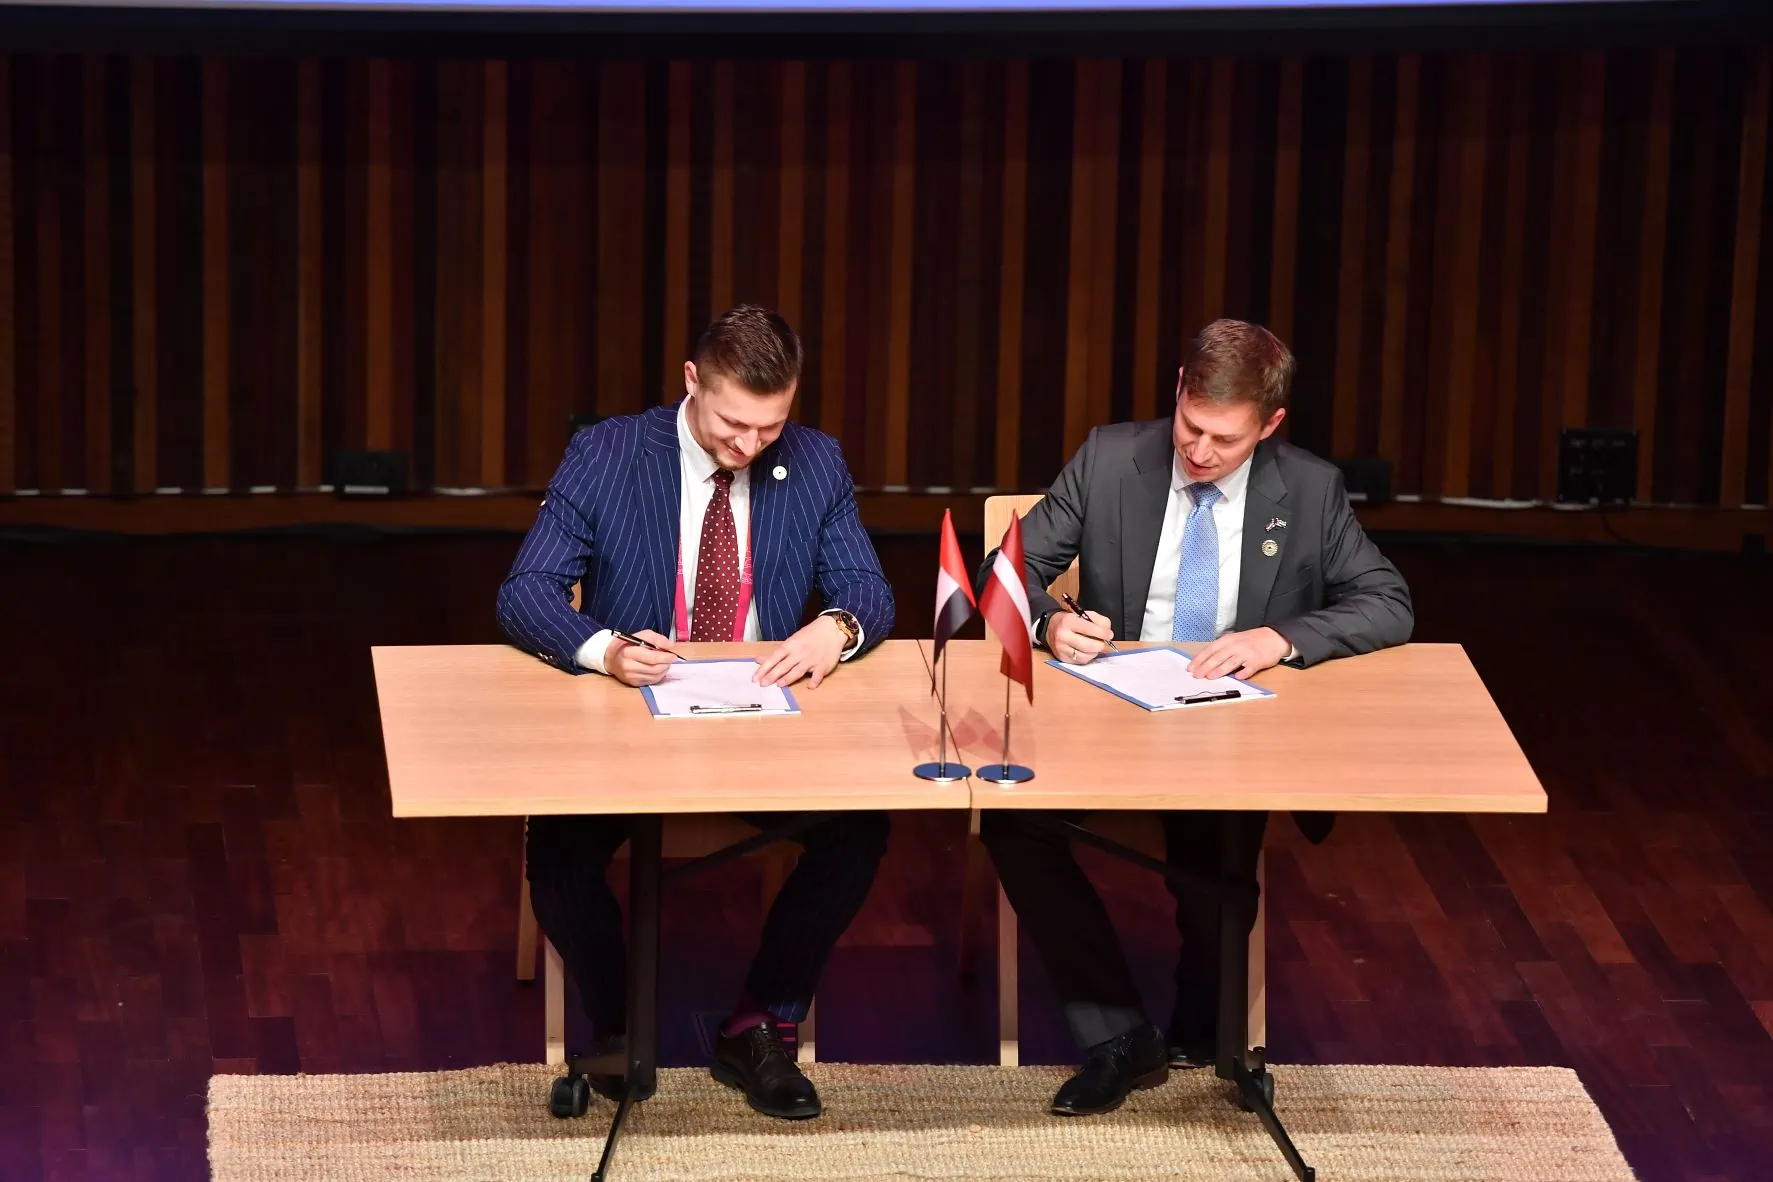 A cooperation agreement has been signed between LIAA and the Riga Investment and Tourism Agency.